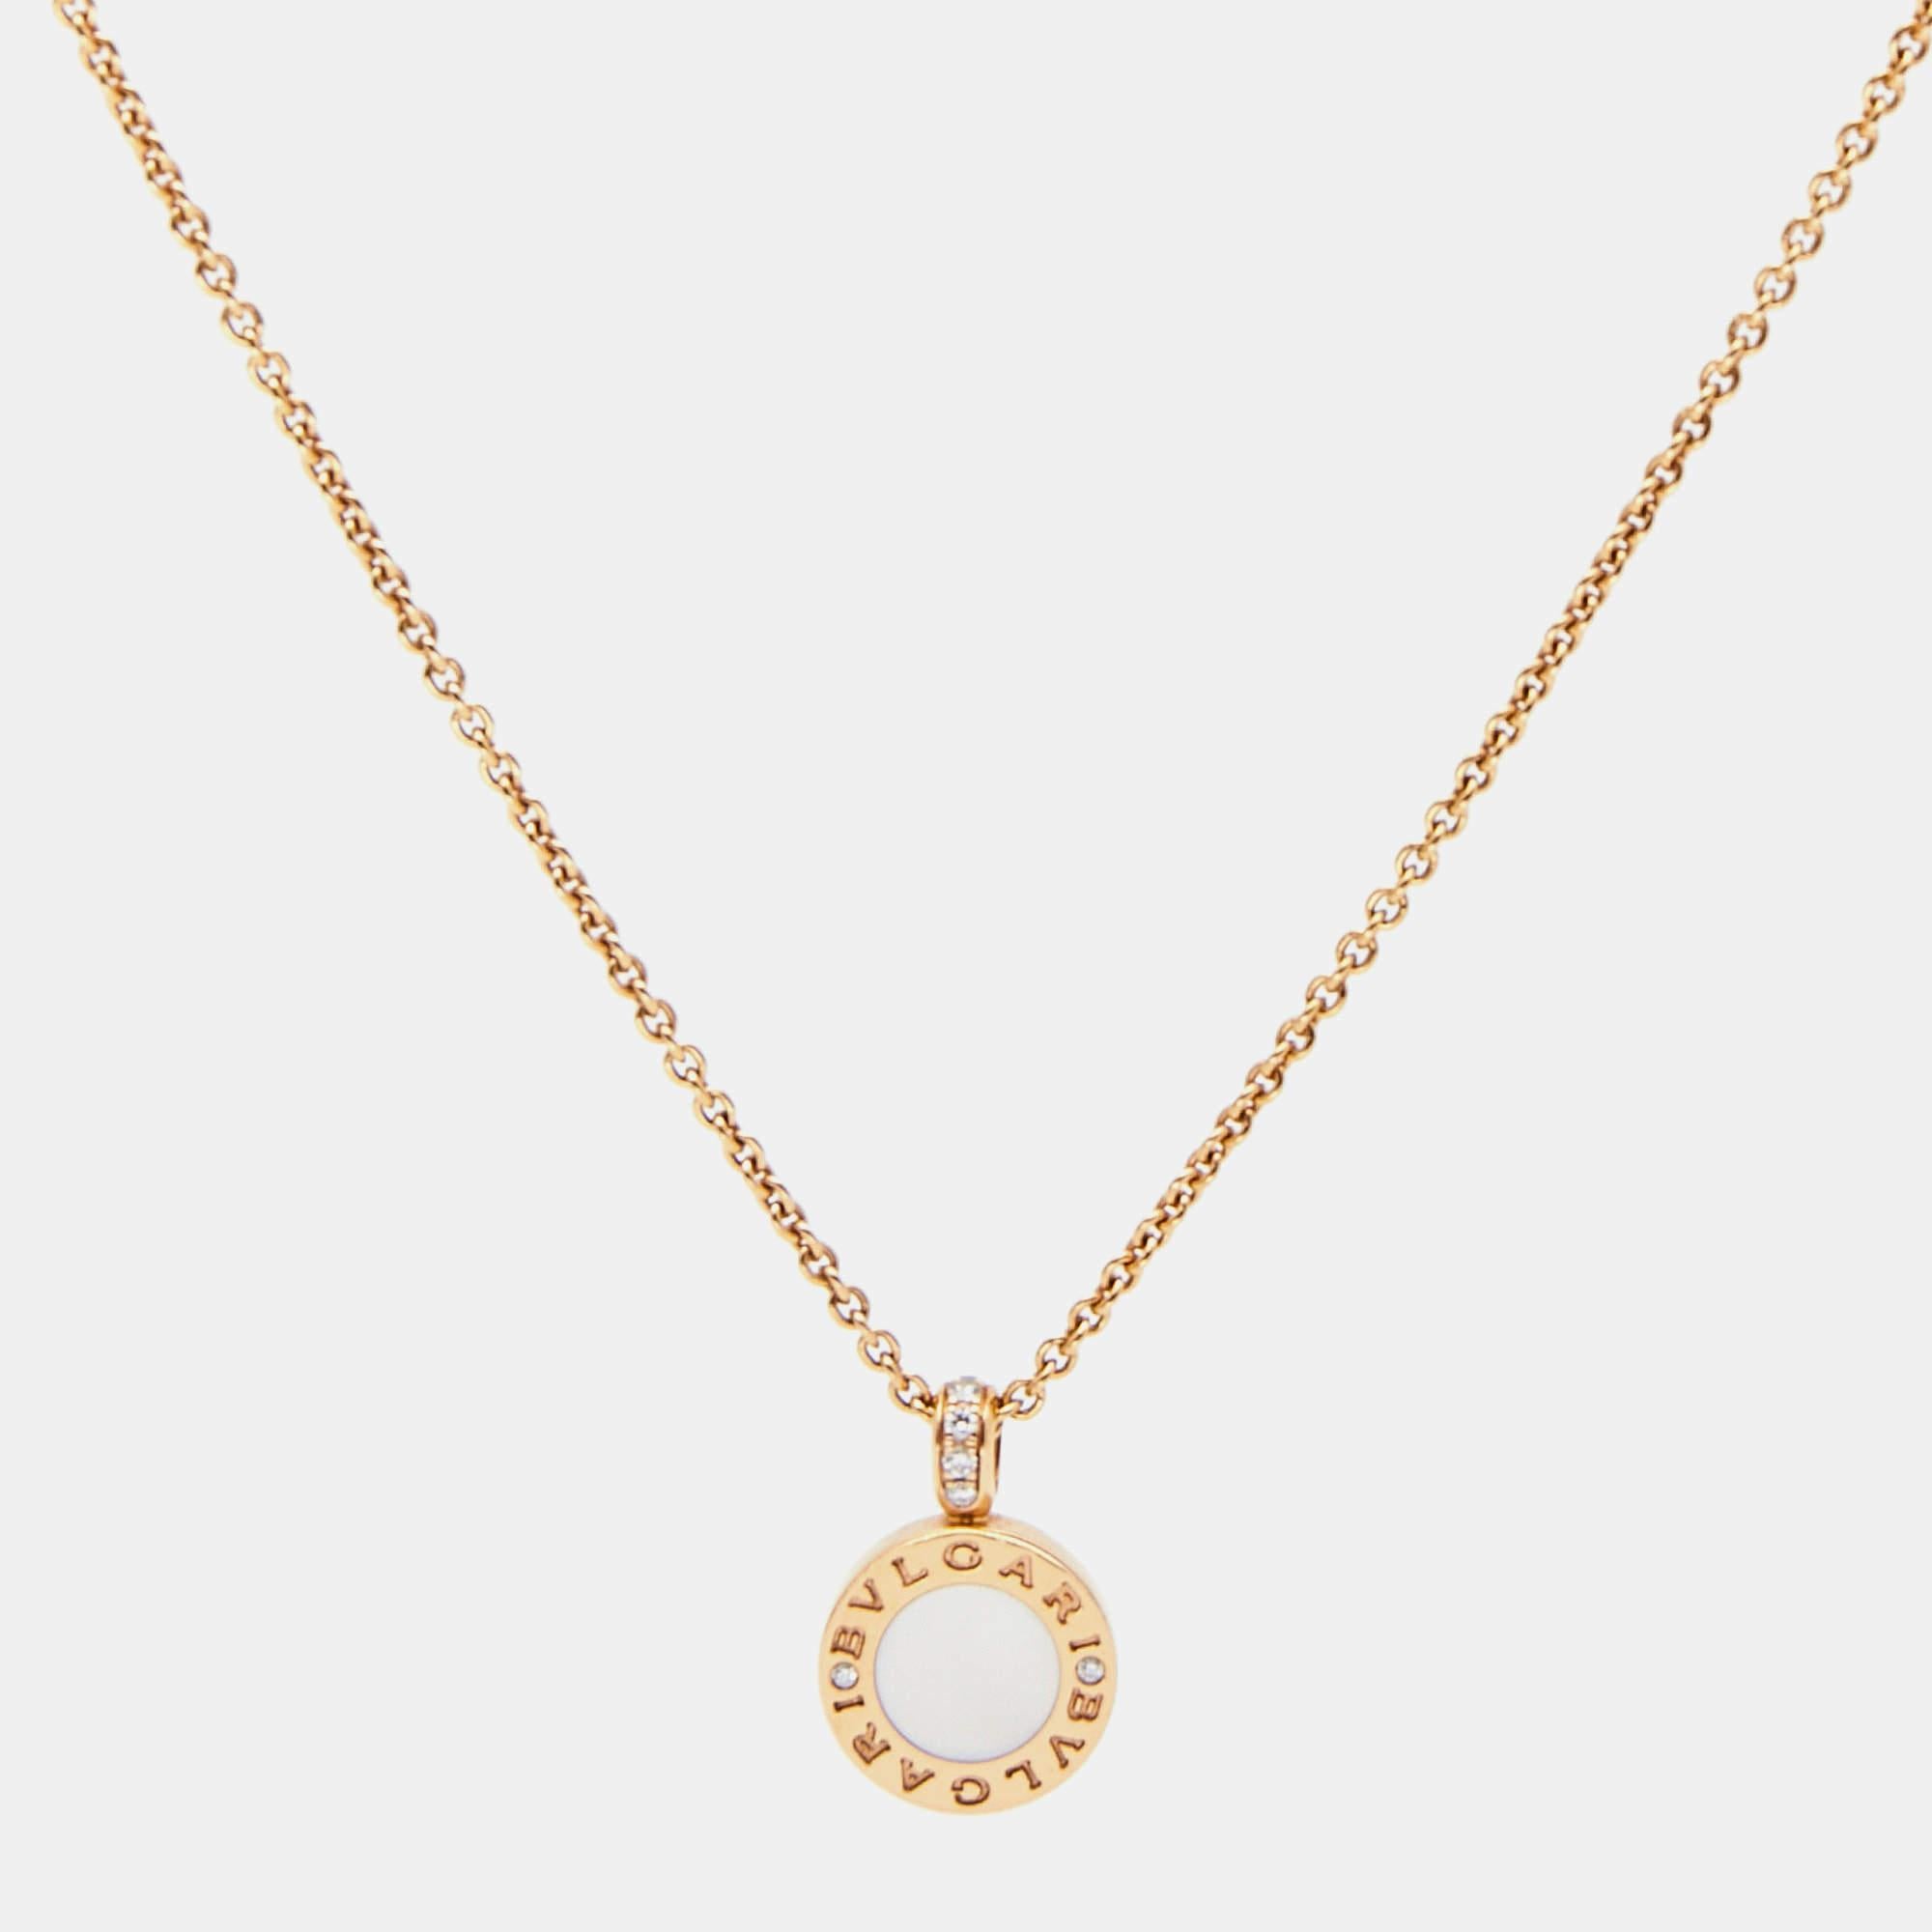 The Bvlgari Bvlgari necklace exudes luxury with its exquisite design. Crafted in 18k rose gold, it features a pendant showcasing a vibrant carnelian gemstone and a delicate mother of pearl, encircled by iconic Bvlgari branding. Dazzling diamonds